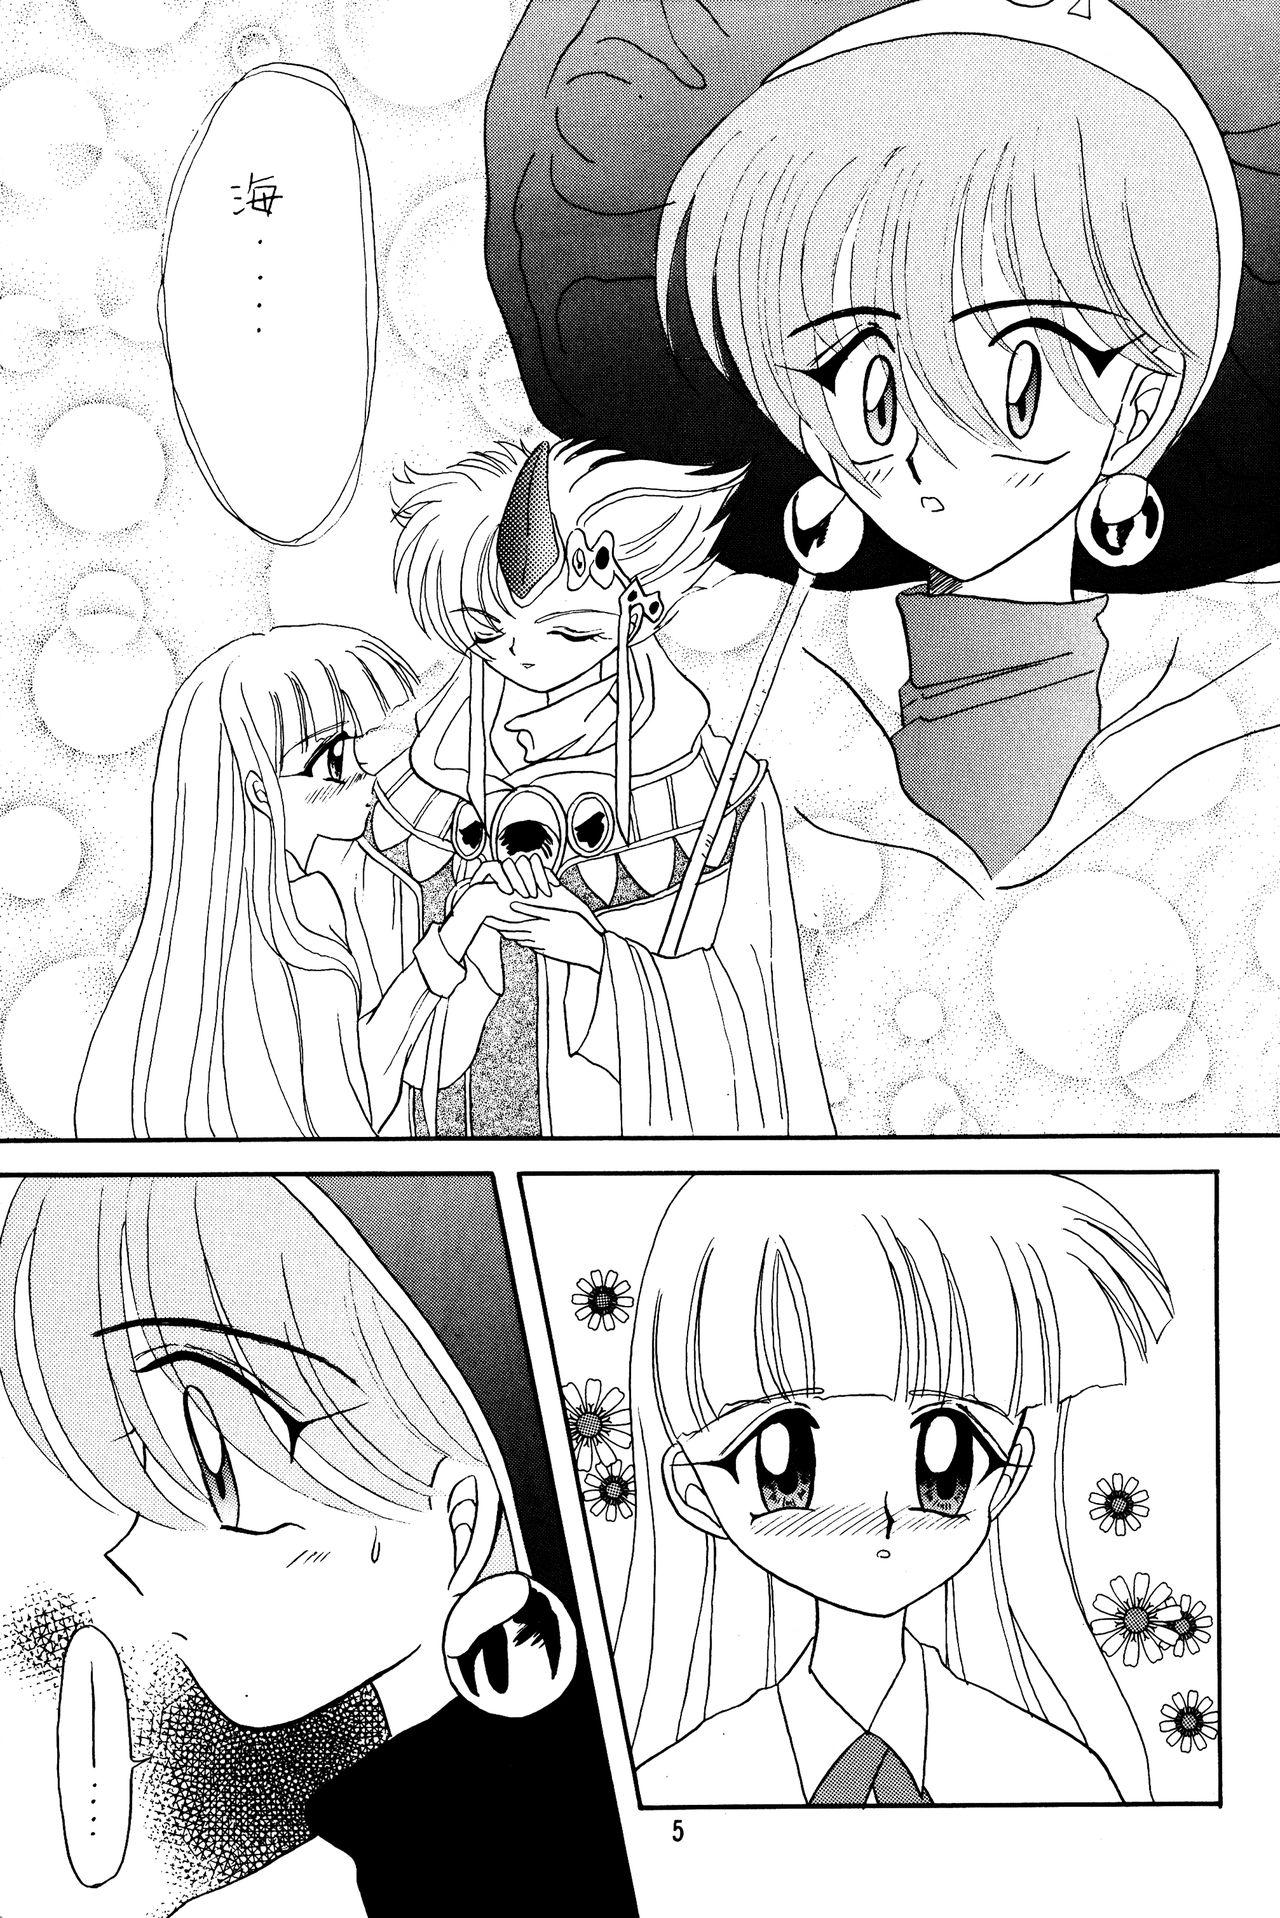 Hot Naked Women Suppin - Magic knight rayearth Vintage - Page 4